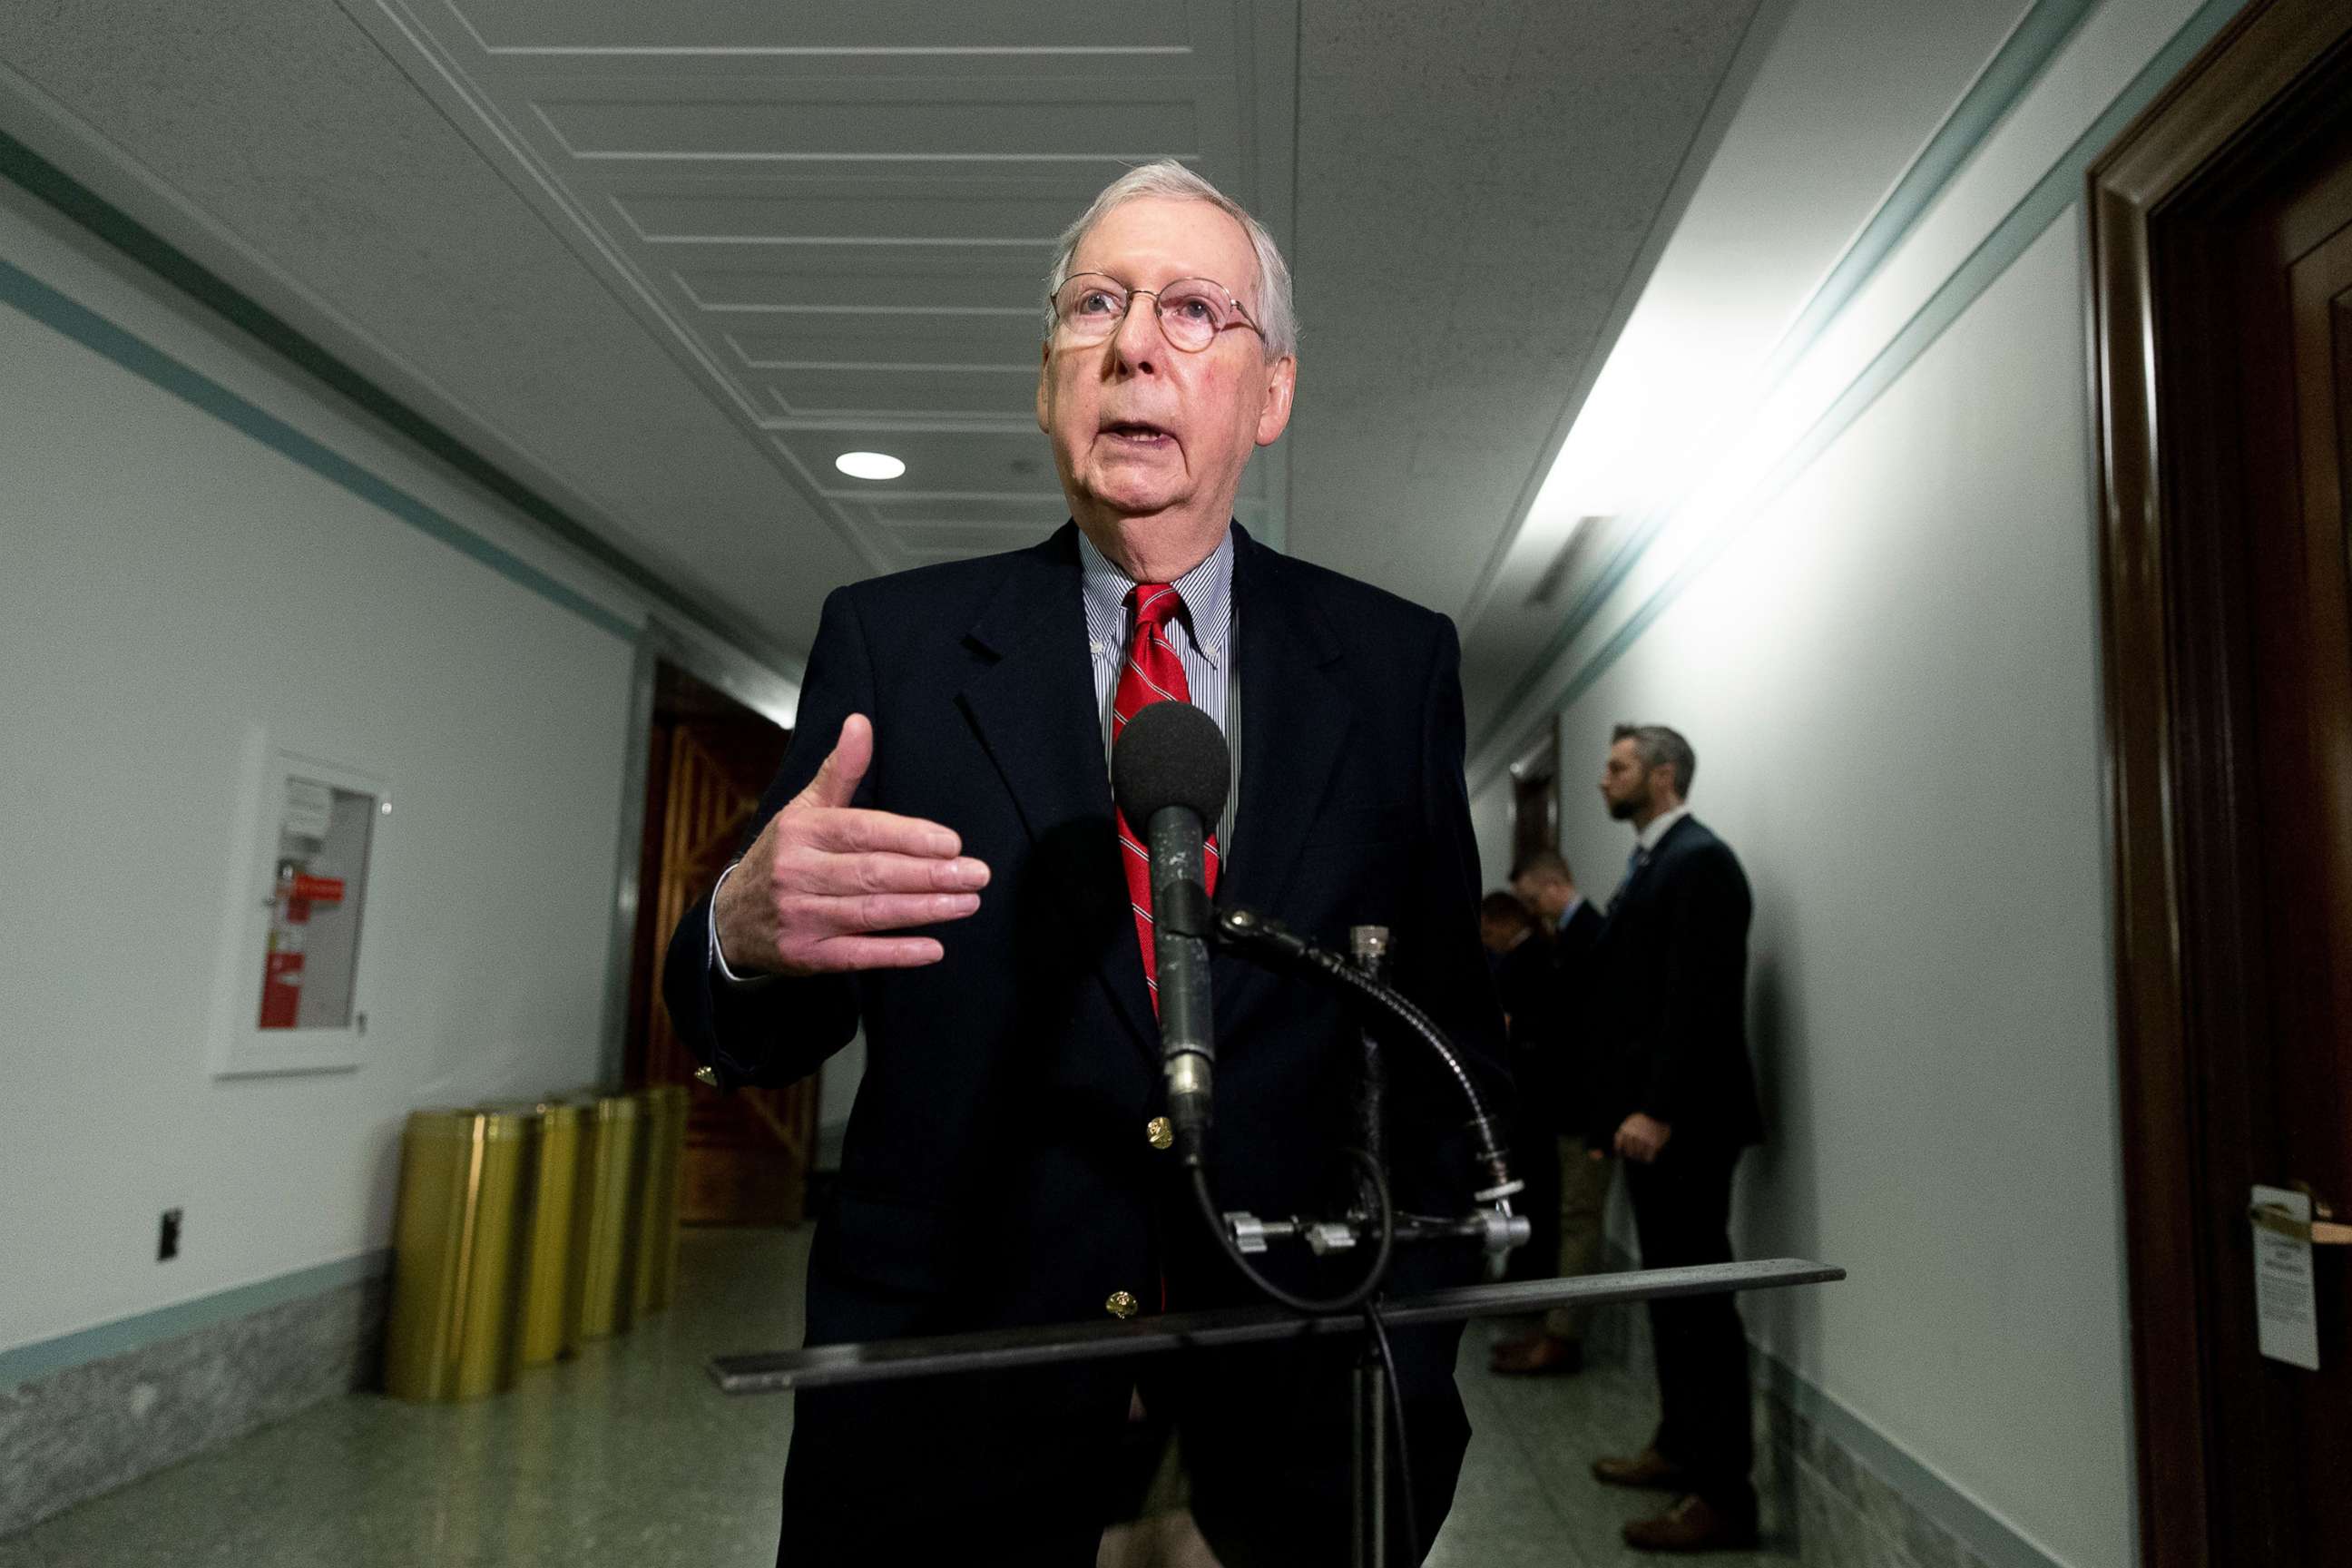 PHOTO: Senate Majority Leader Mitch McConnell delivers remarks to the media before attending a closed-door Senate Republican luncheon on Capitol Hill, in Washington, DC, March 21, 2020. 